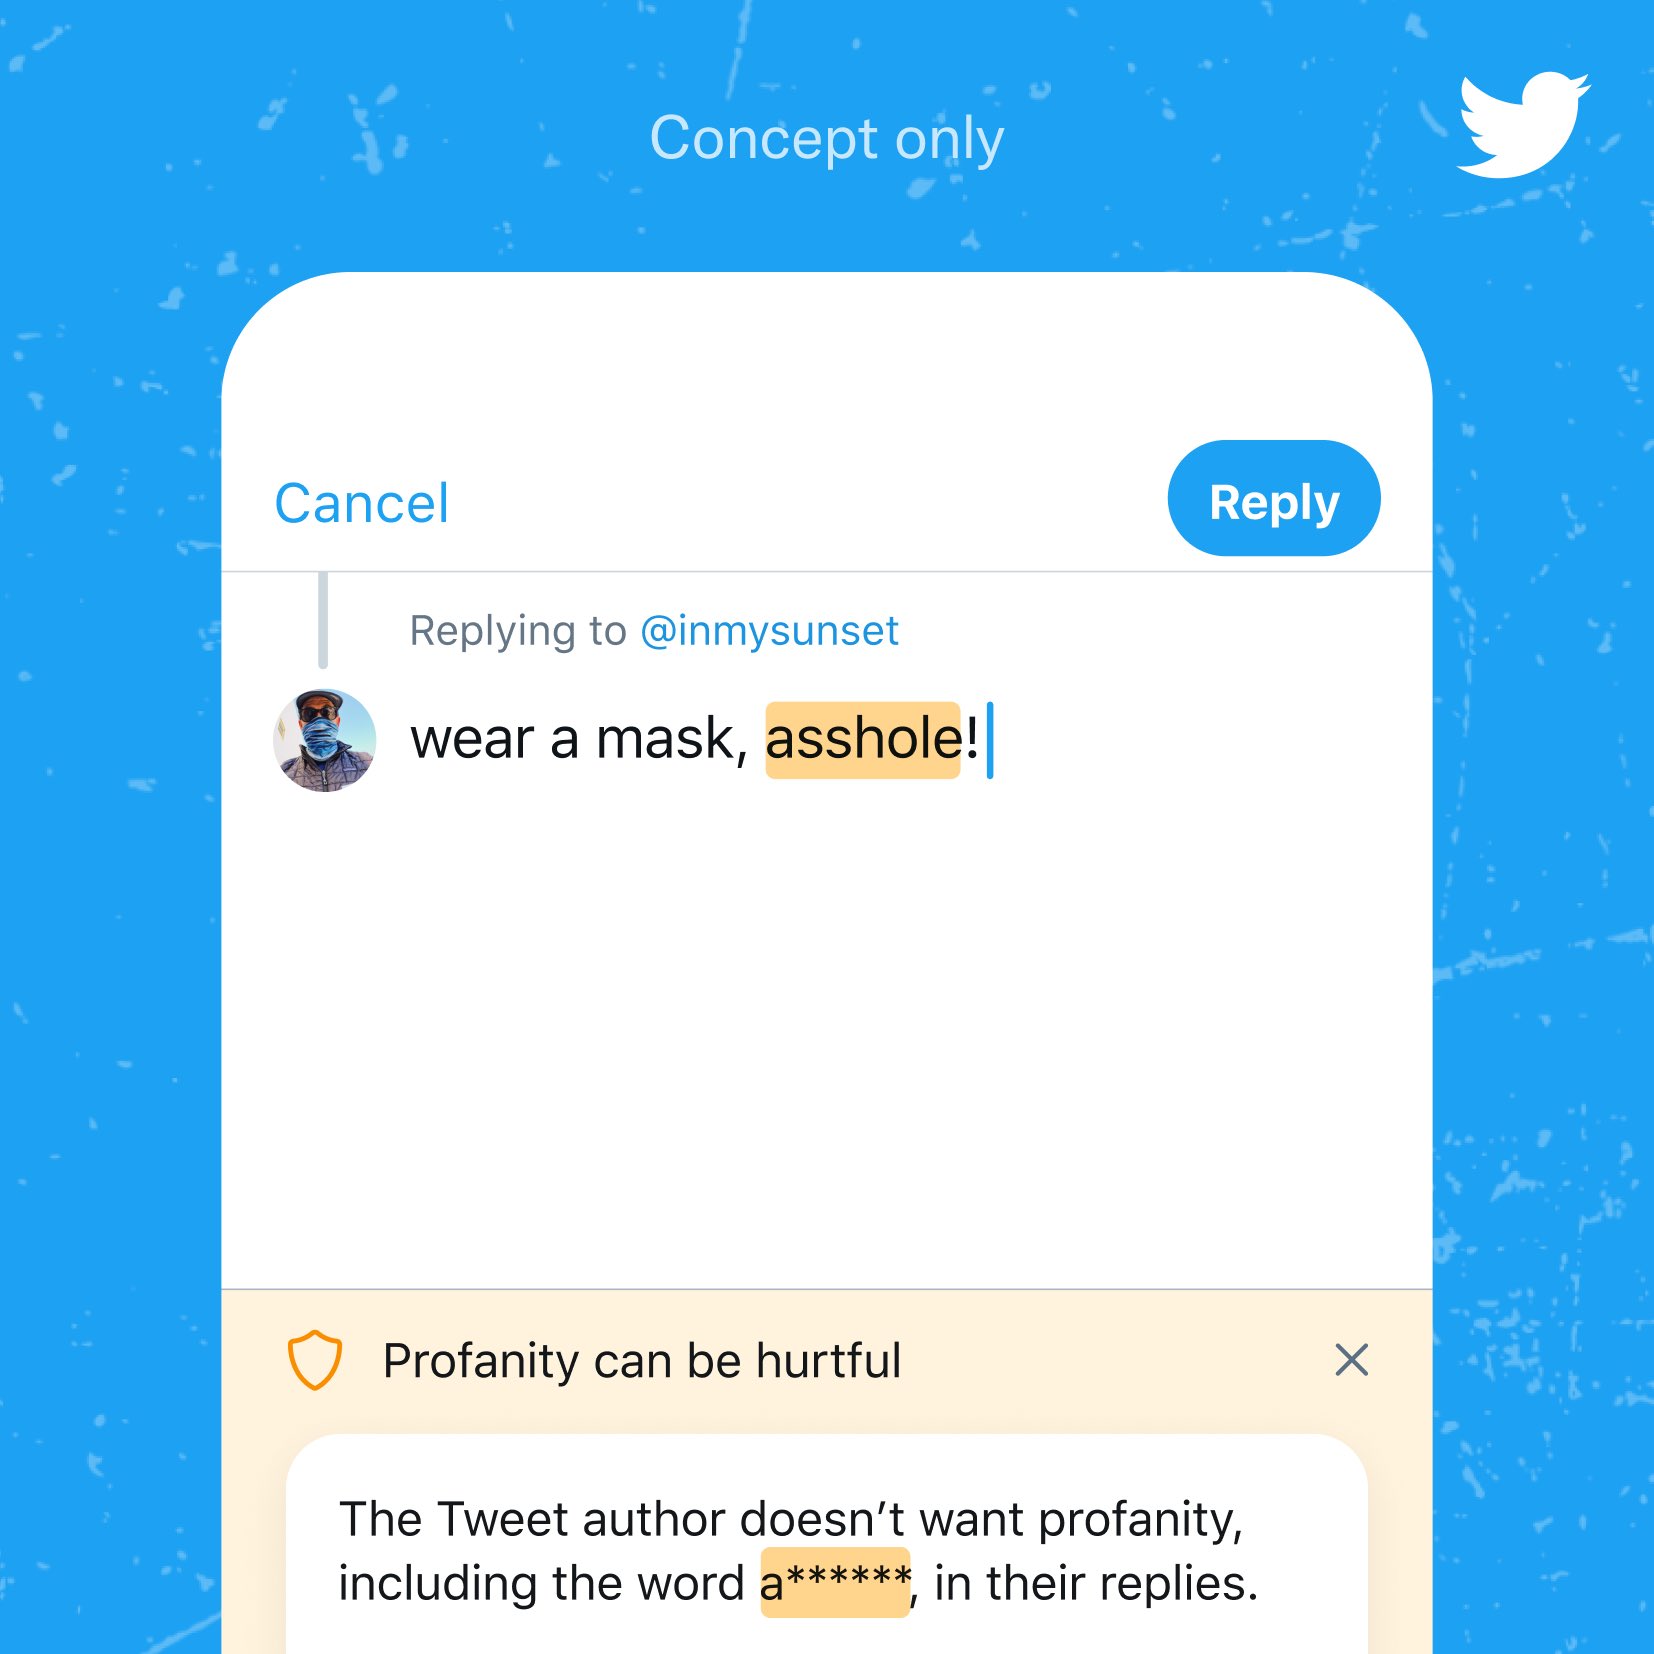 The language control feature on Twitter